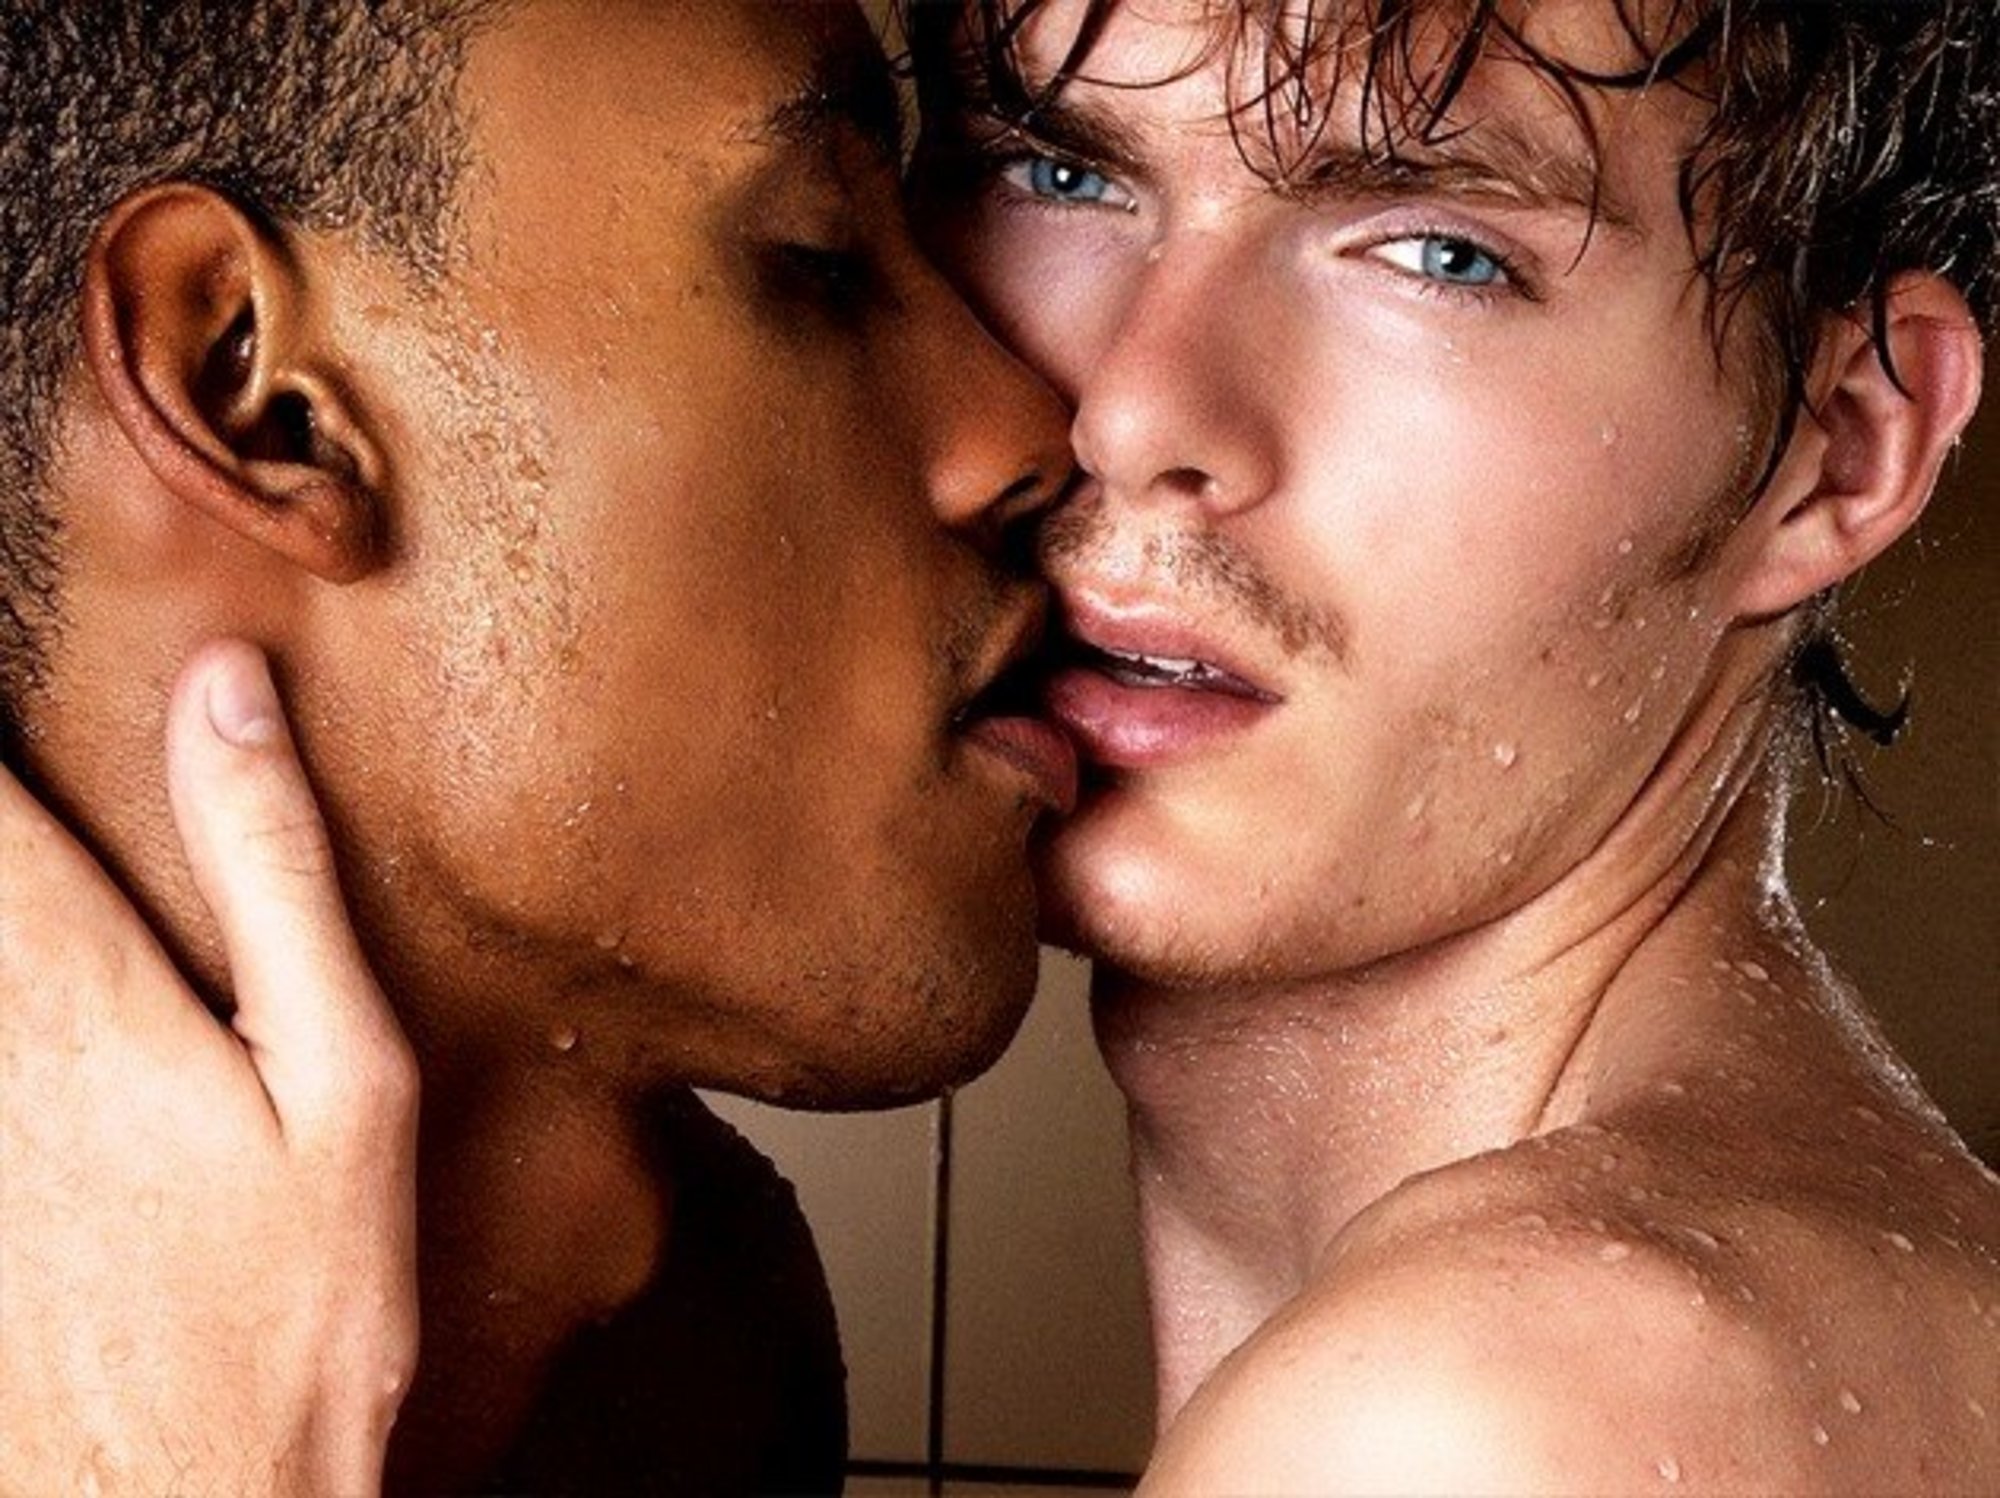 Movie and video guys kissing dirty